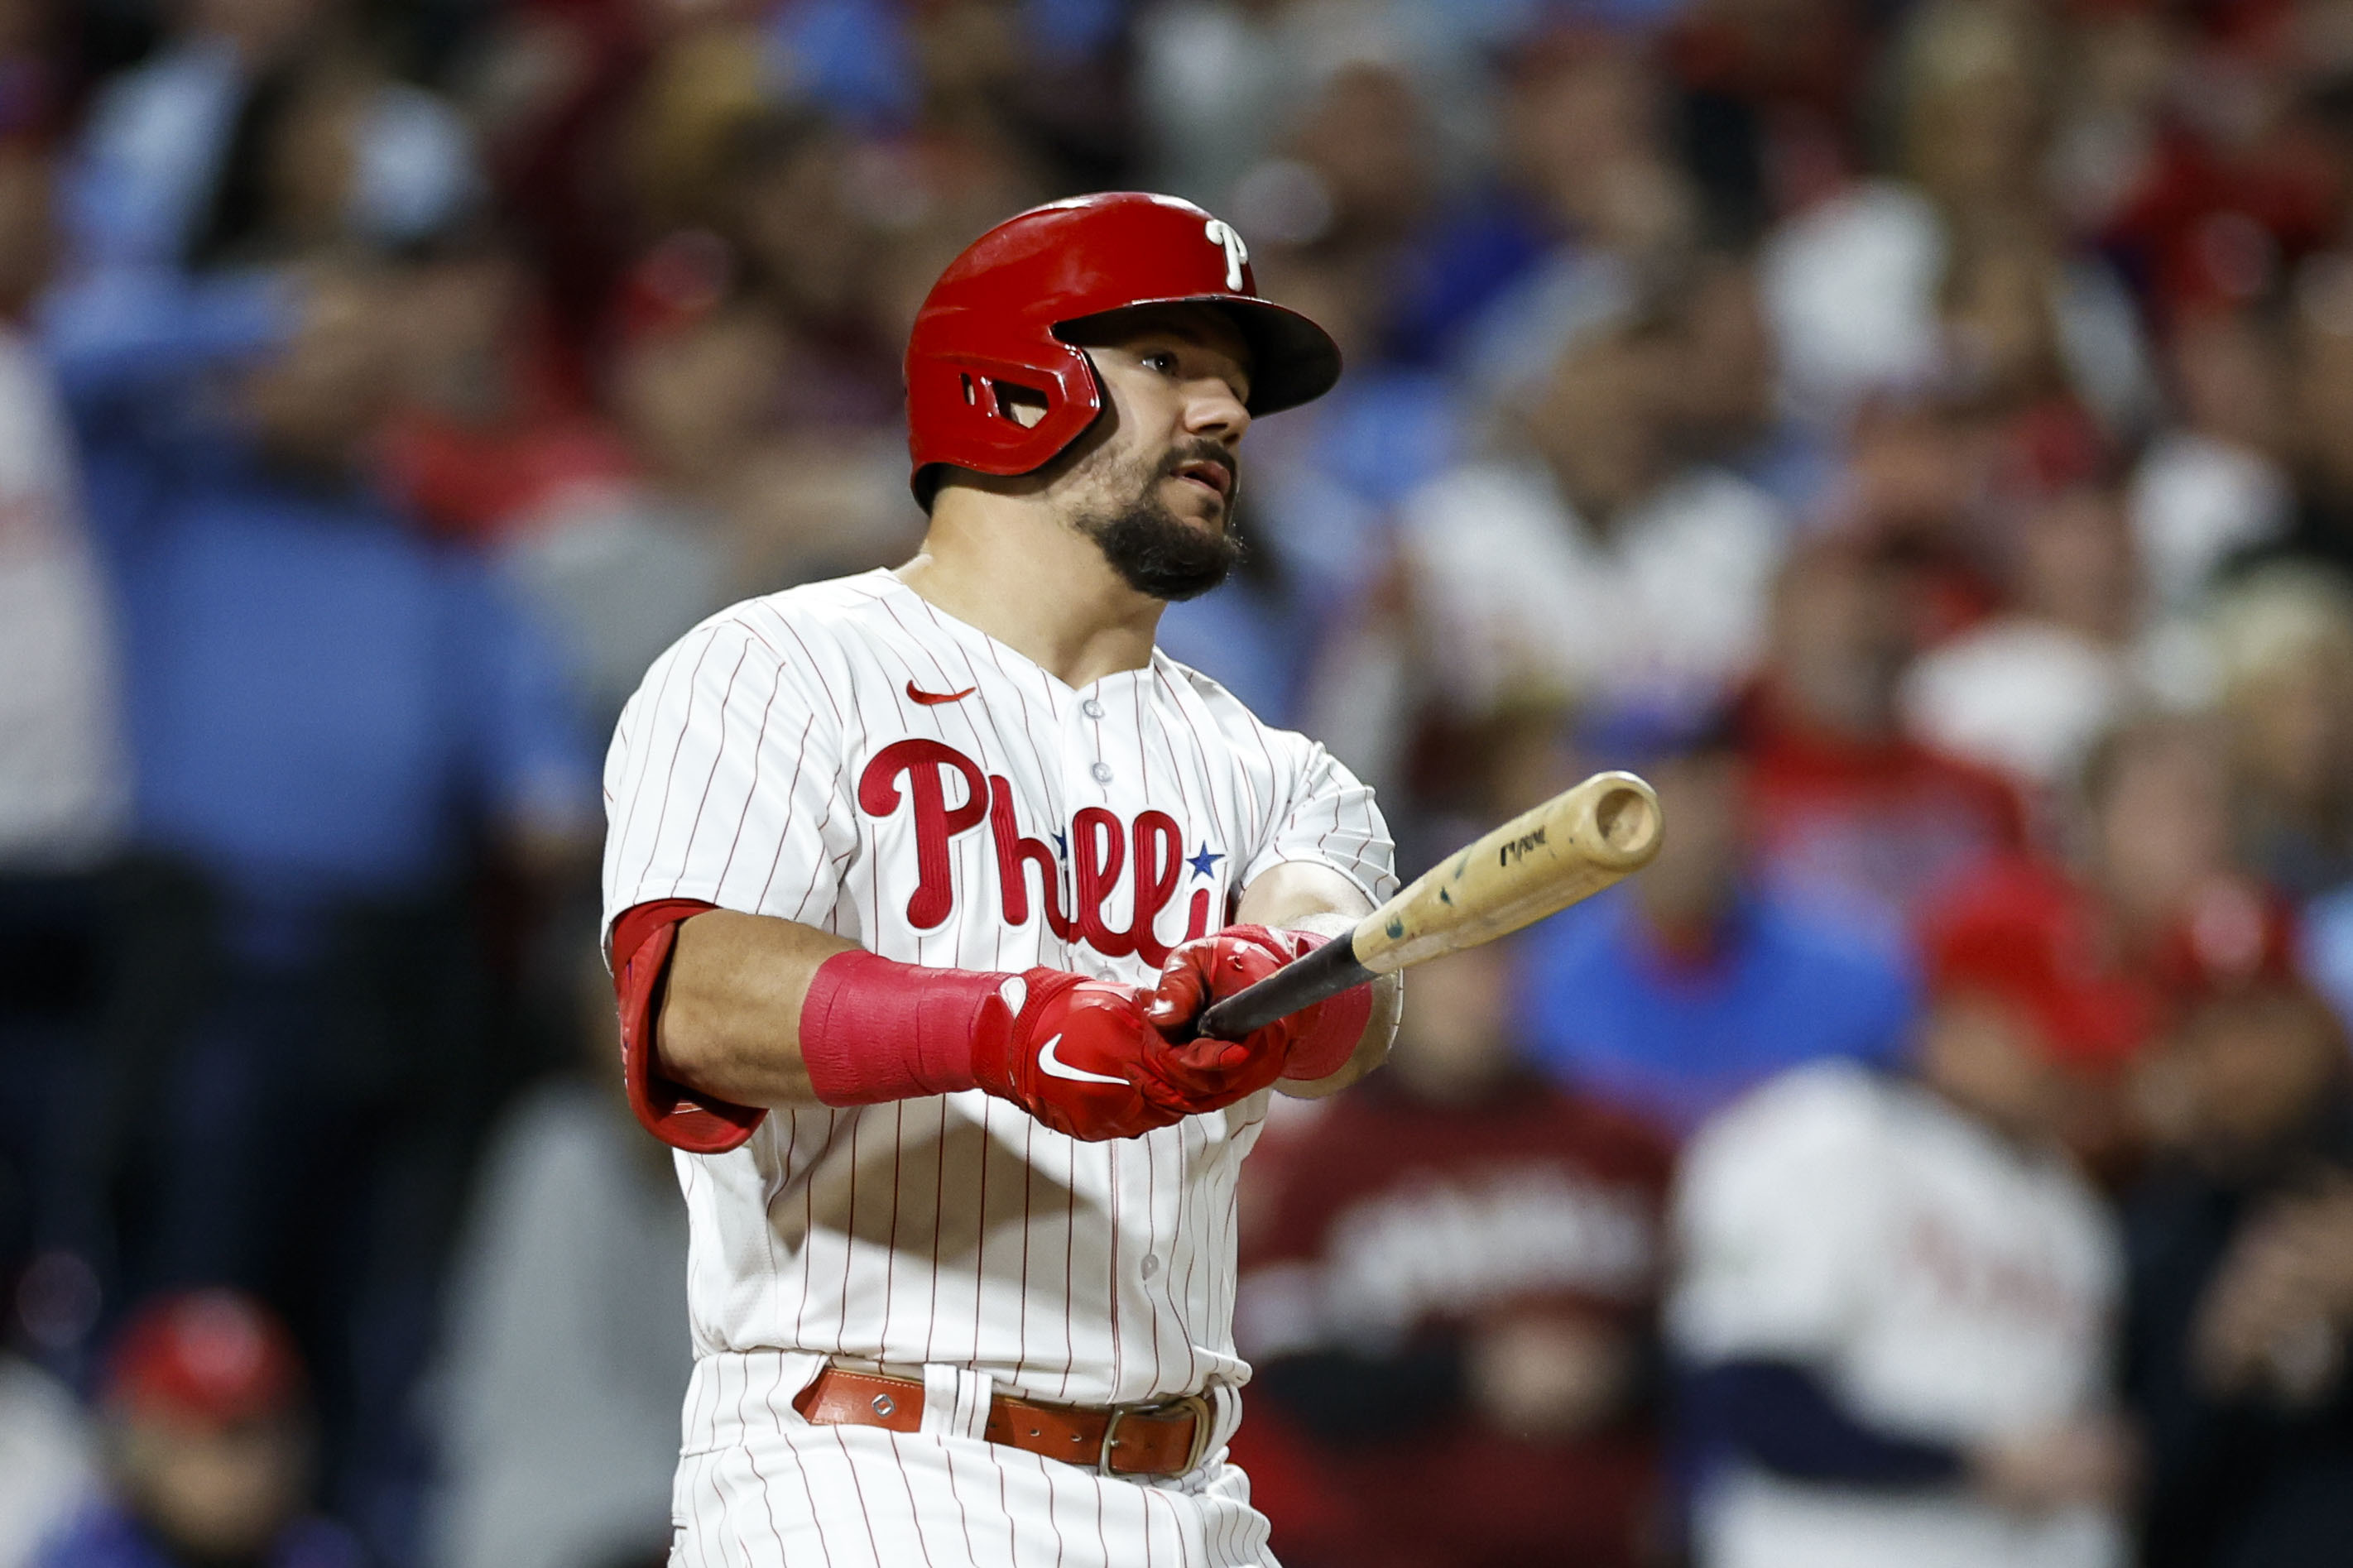 Phillies: Bryce Harper's dramatic home run in 9 awesome photos